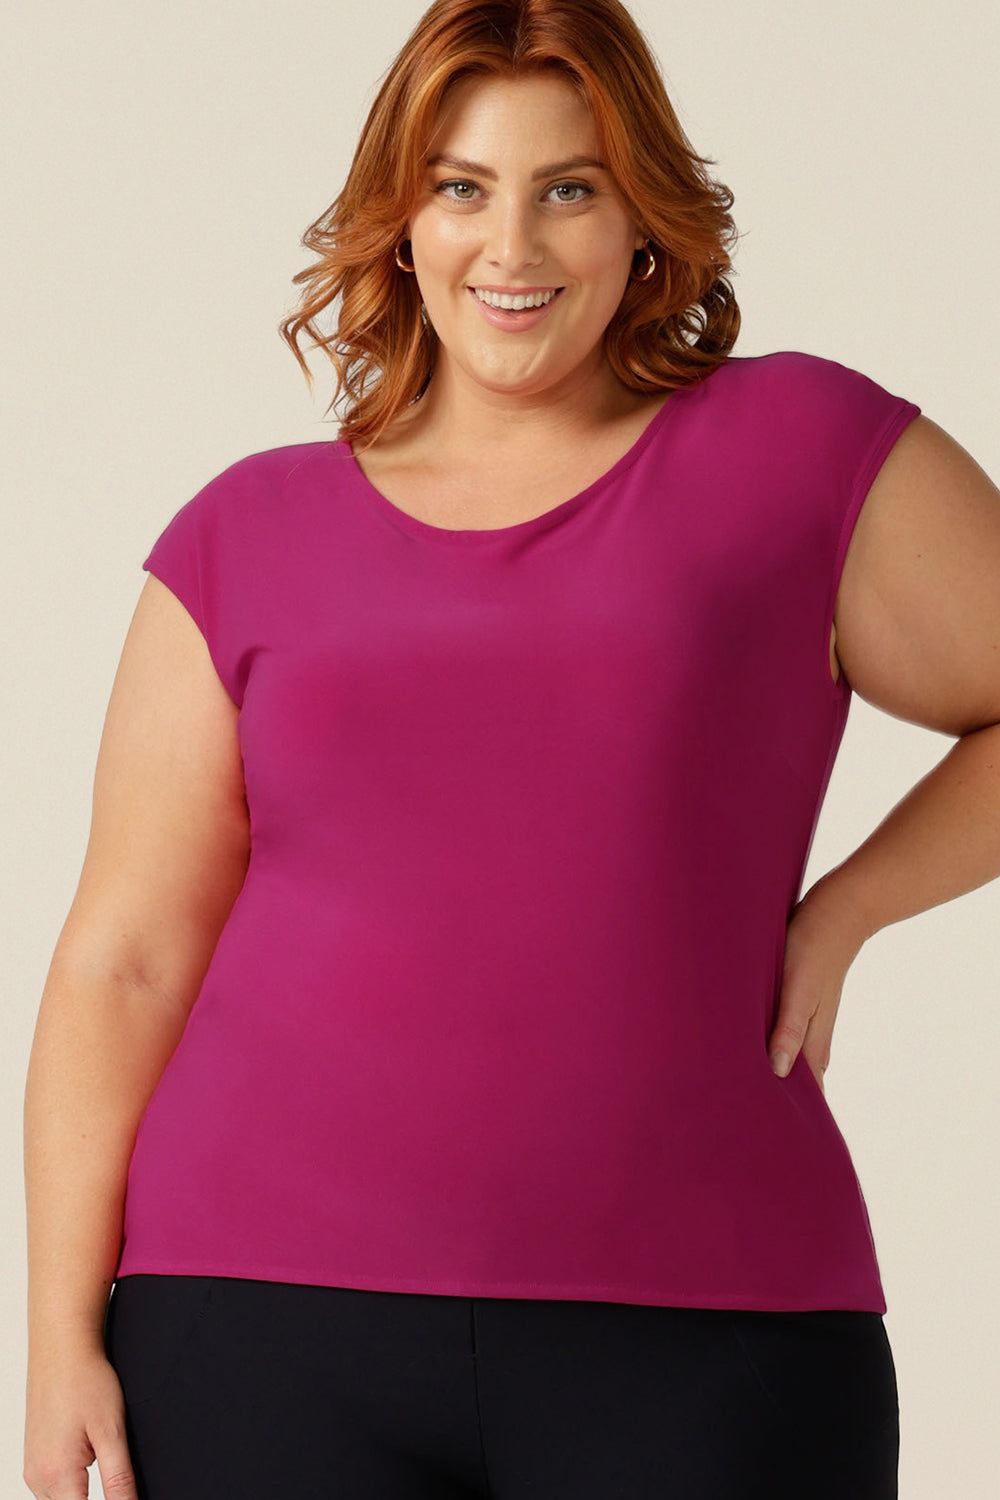 A curvy, size 18 woman wears a boat neck top with cap sleeves. In fuchsia pink jersey, it's a slim fit top that's made in Australia and available to shop online.